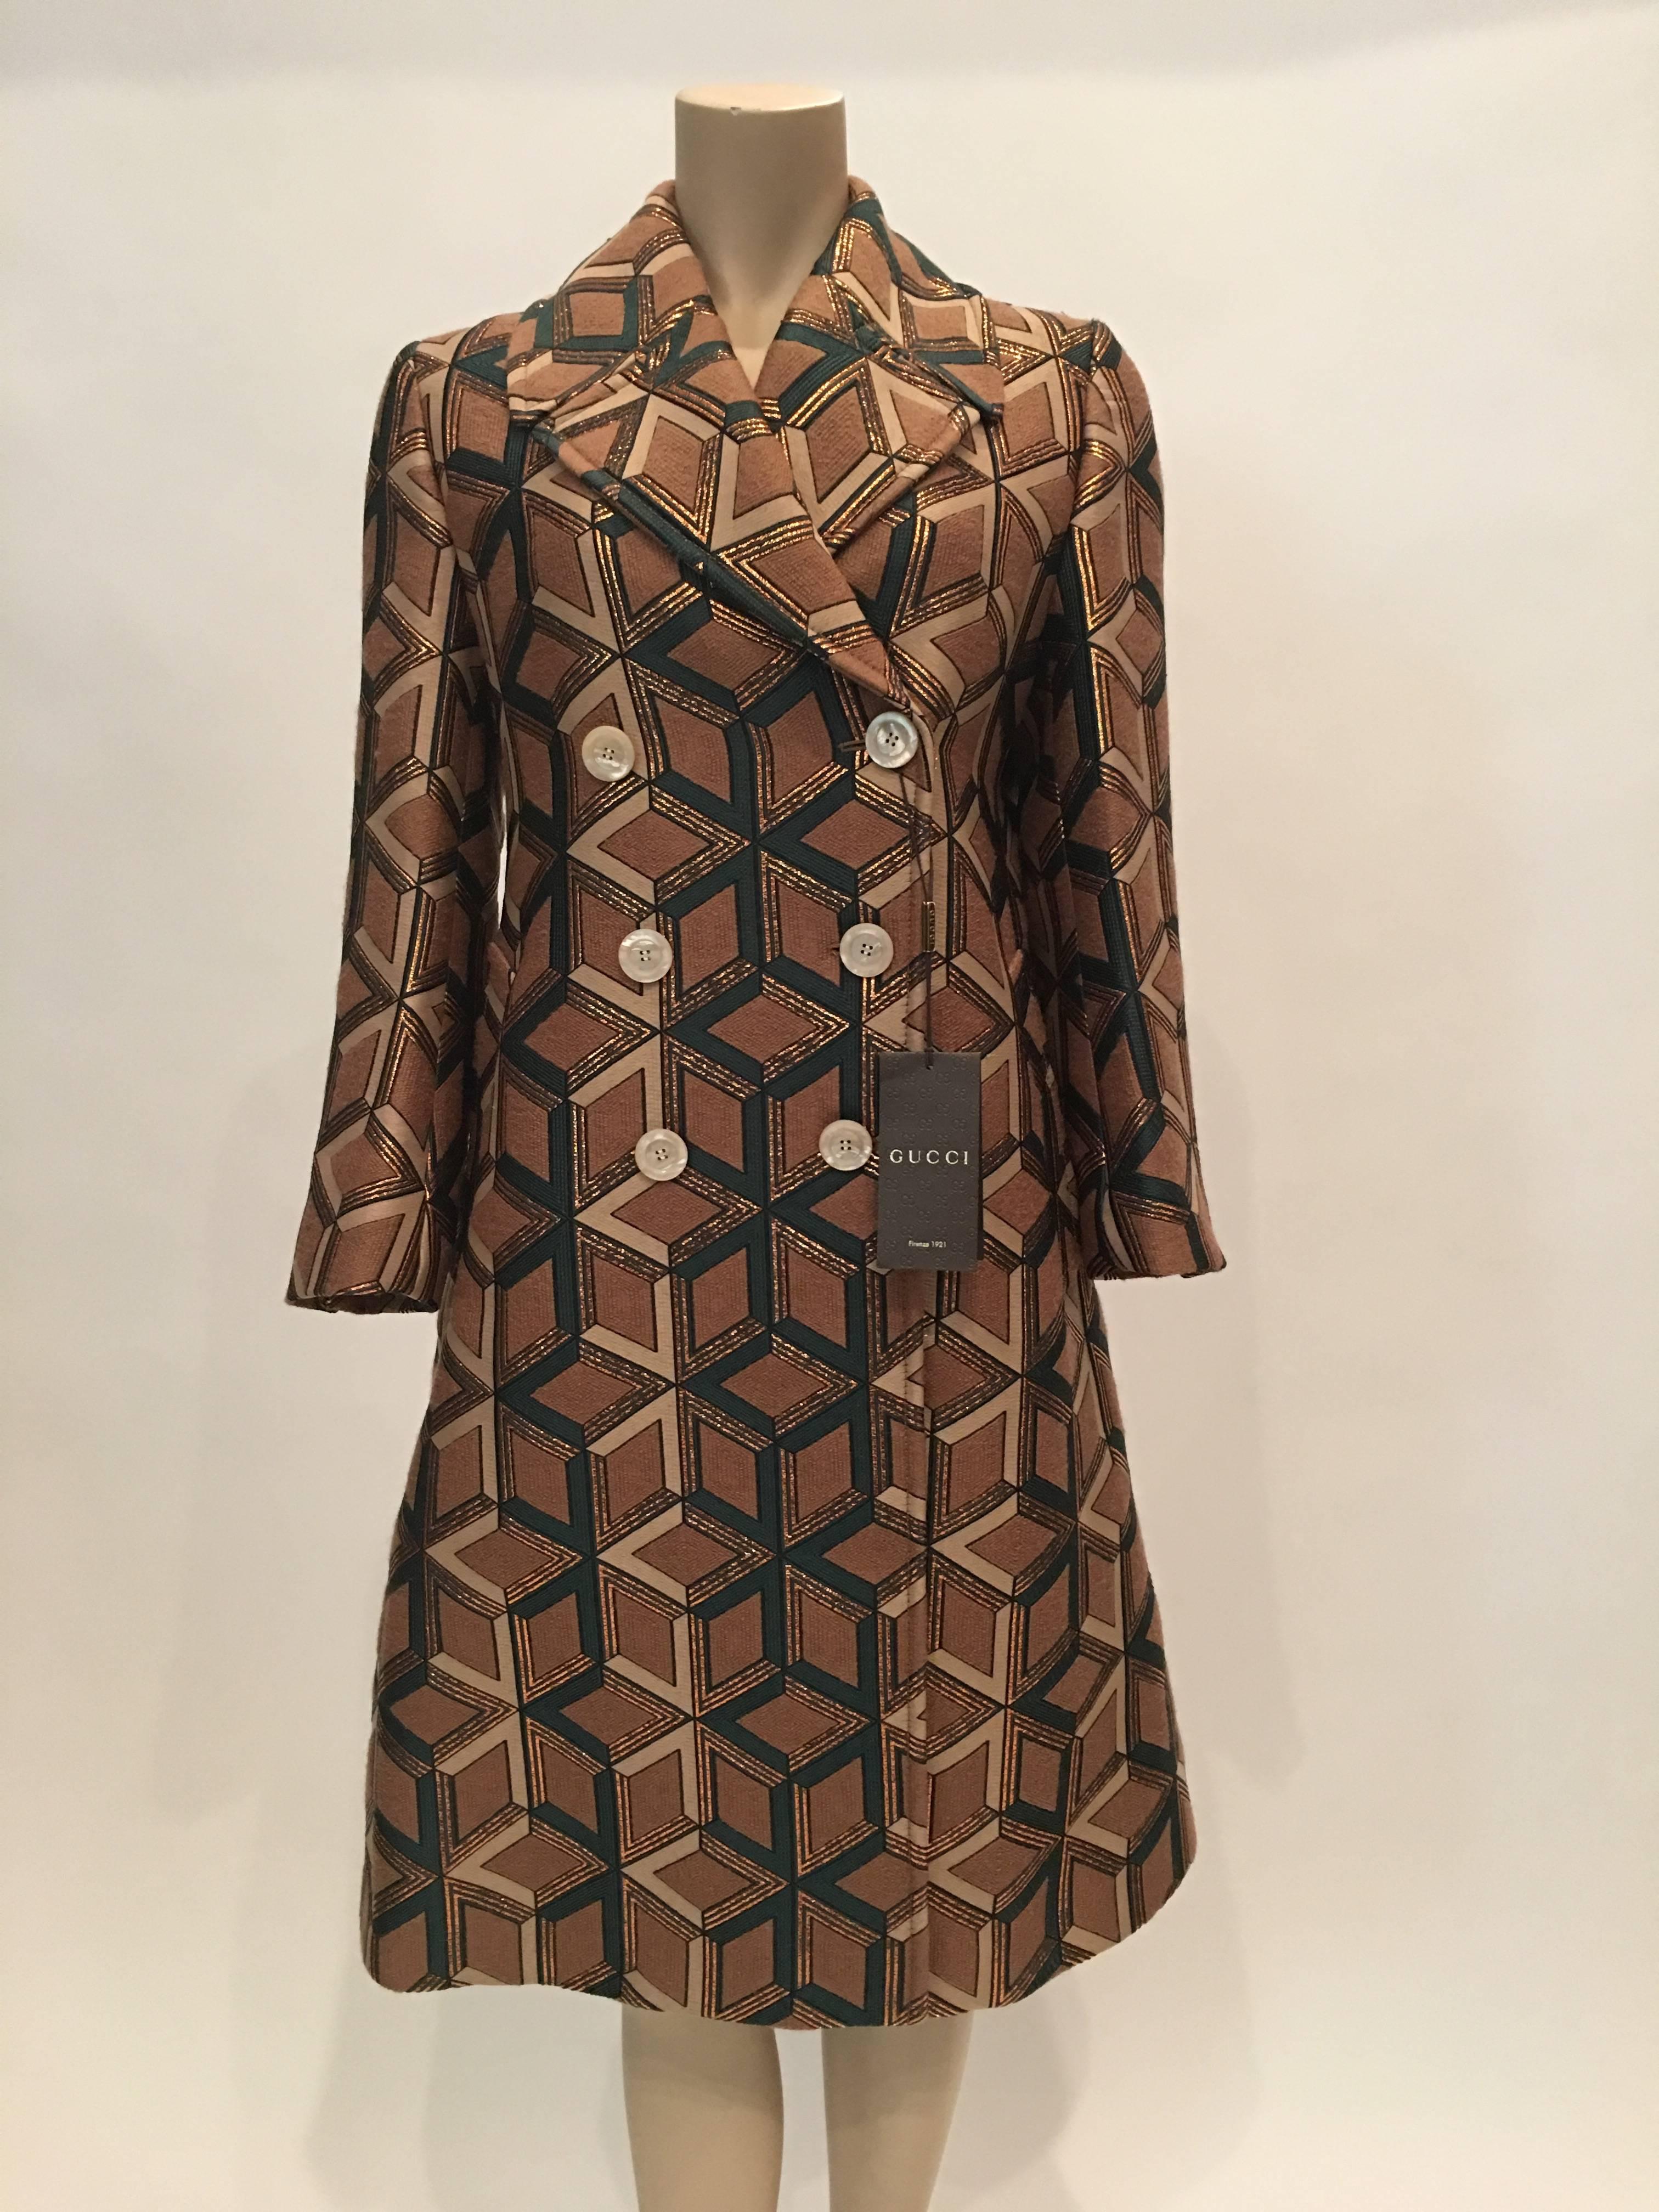 Gucci Geometric Copper & Tan Double Breasted Wool Coat with Black Silk Lining.
Made in France

Measurements : *ALL MEASUREMENTS TAKEN FLAT*
Size Label : 42
Shoulders : 15